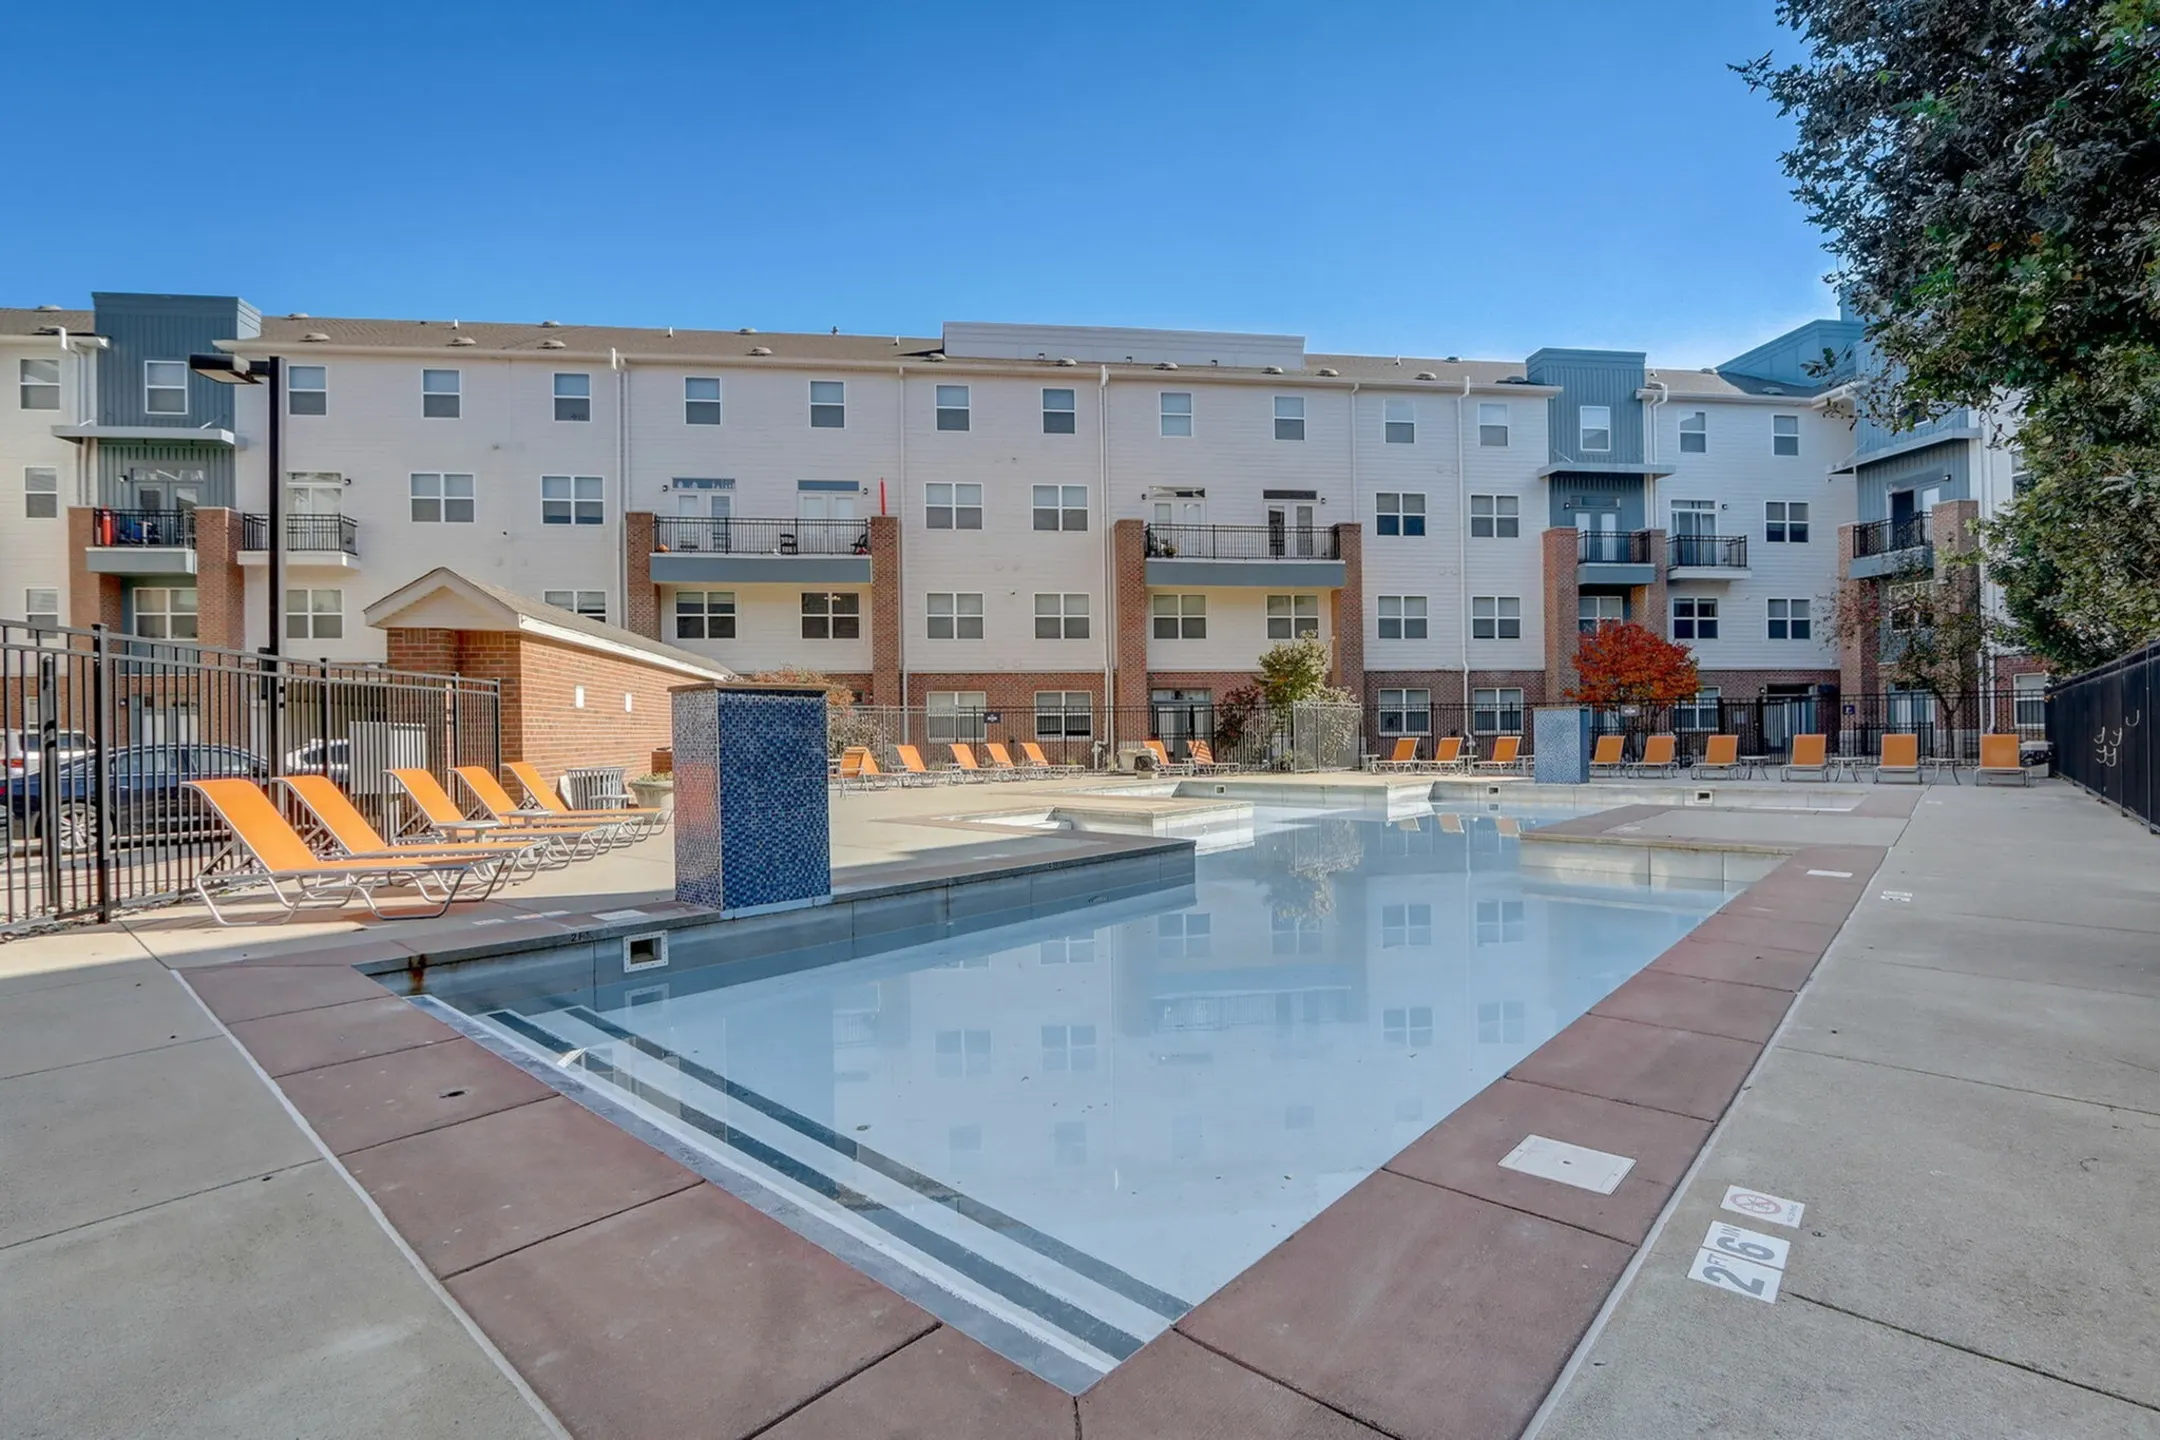 Pool - Ralston Apartments - Indianapolis, IN